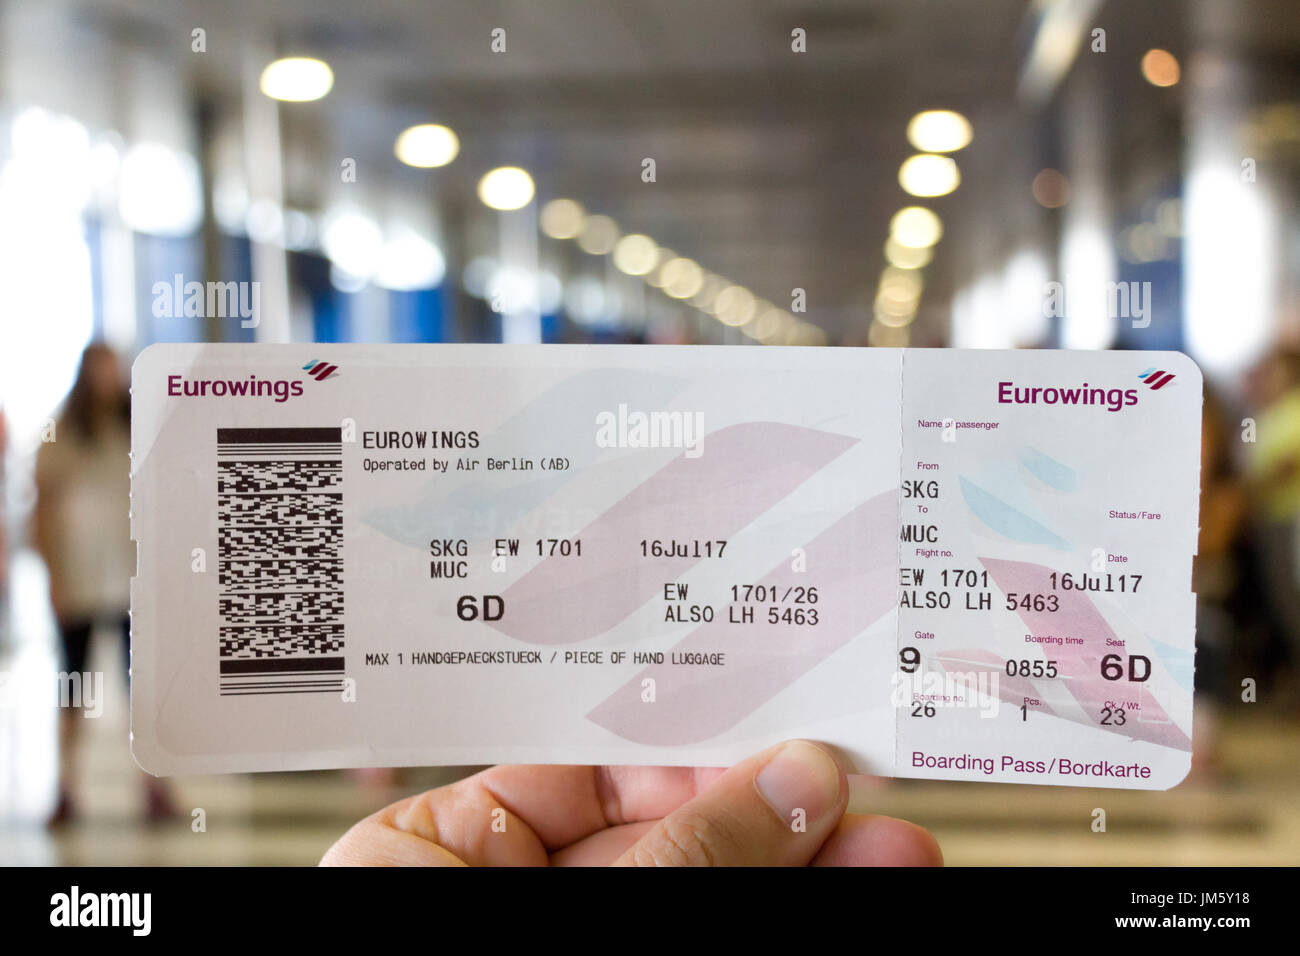 Thessaloniki , Greece - July 16, 2017: Eurowings boarding pass for the route Thessaloniki - Munich at the boarding gates of the Makedonia Airport. Stock Photo